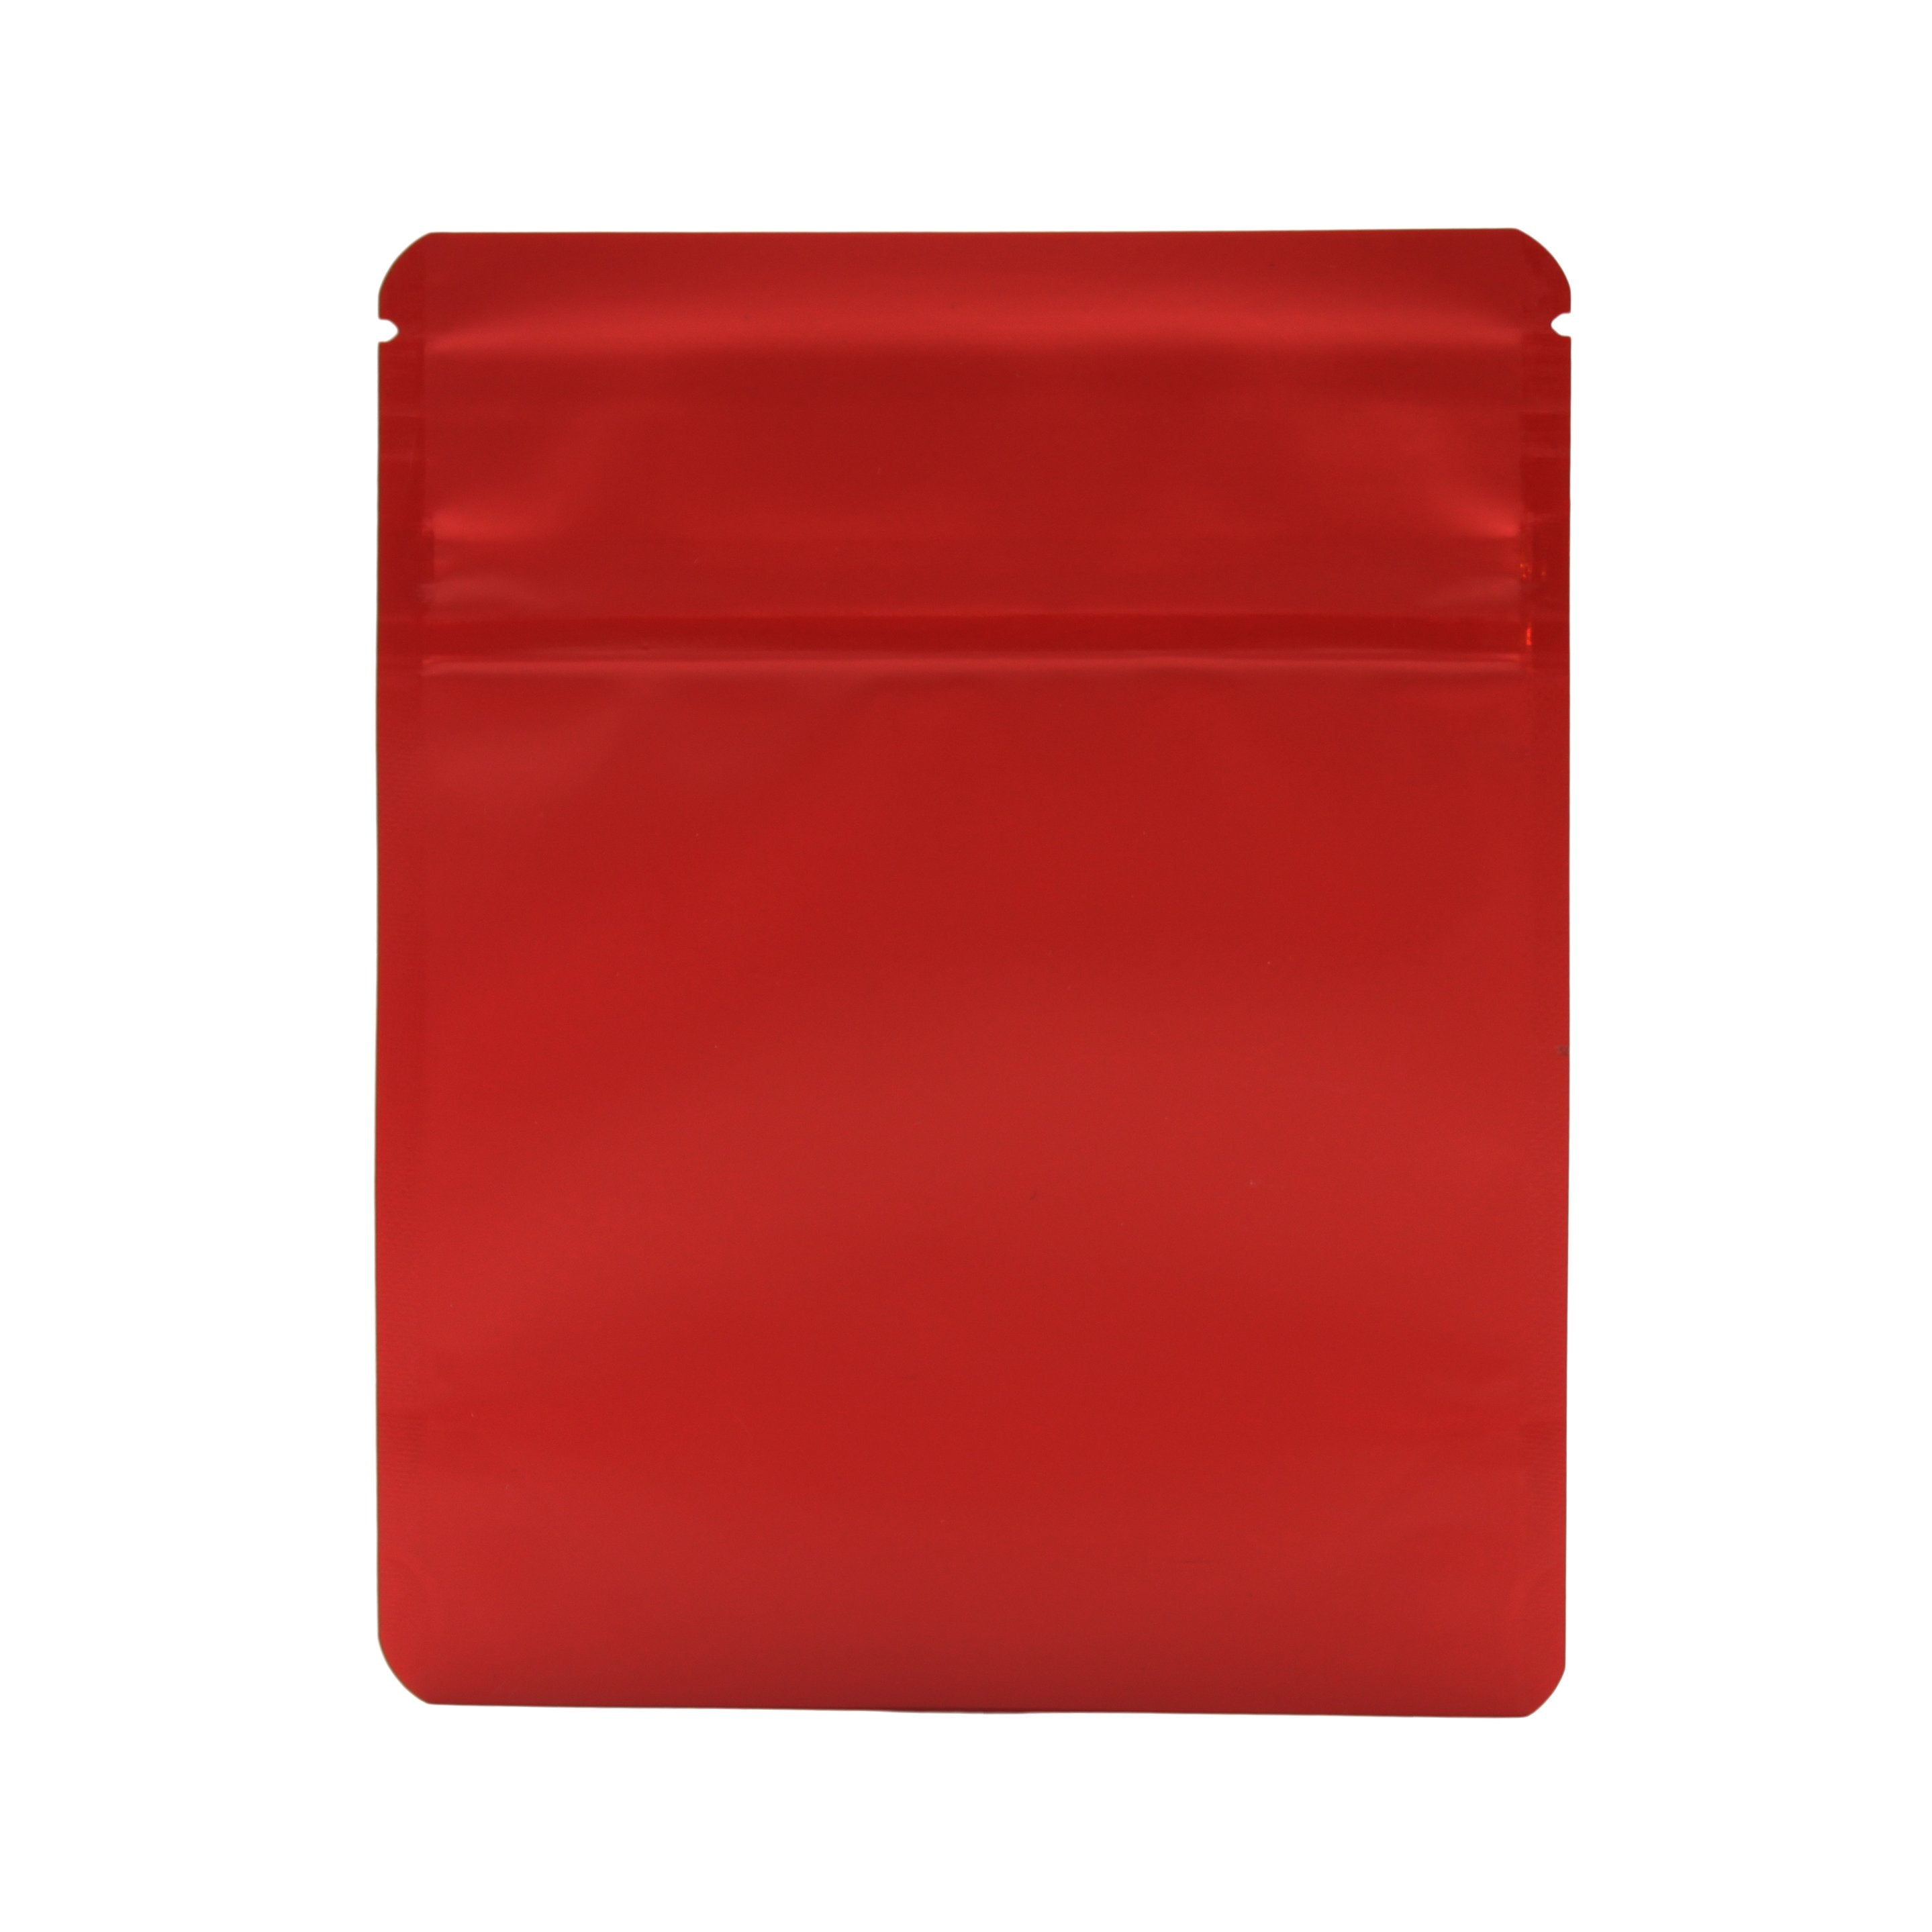 Bag King Child-Resistant Opaque Wide Mouth Bag (1/4th oz) 4.7" x 5.9" Matte Red